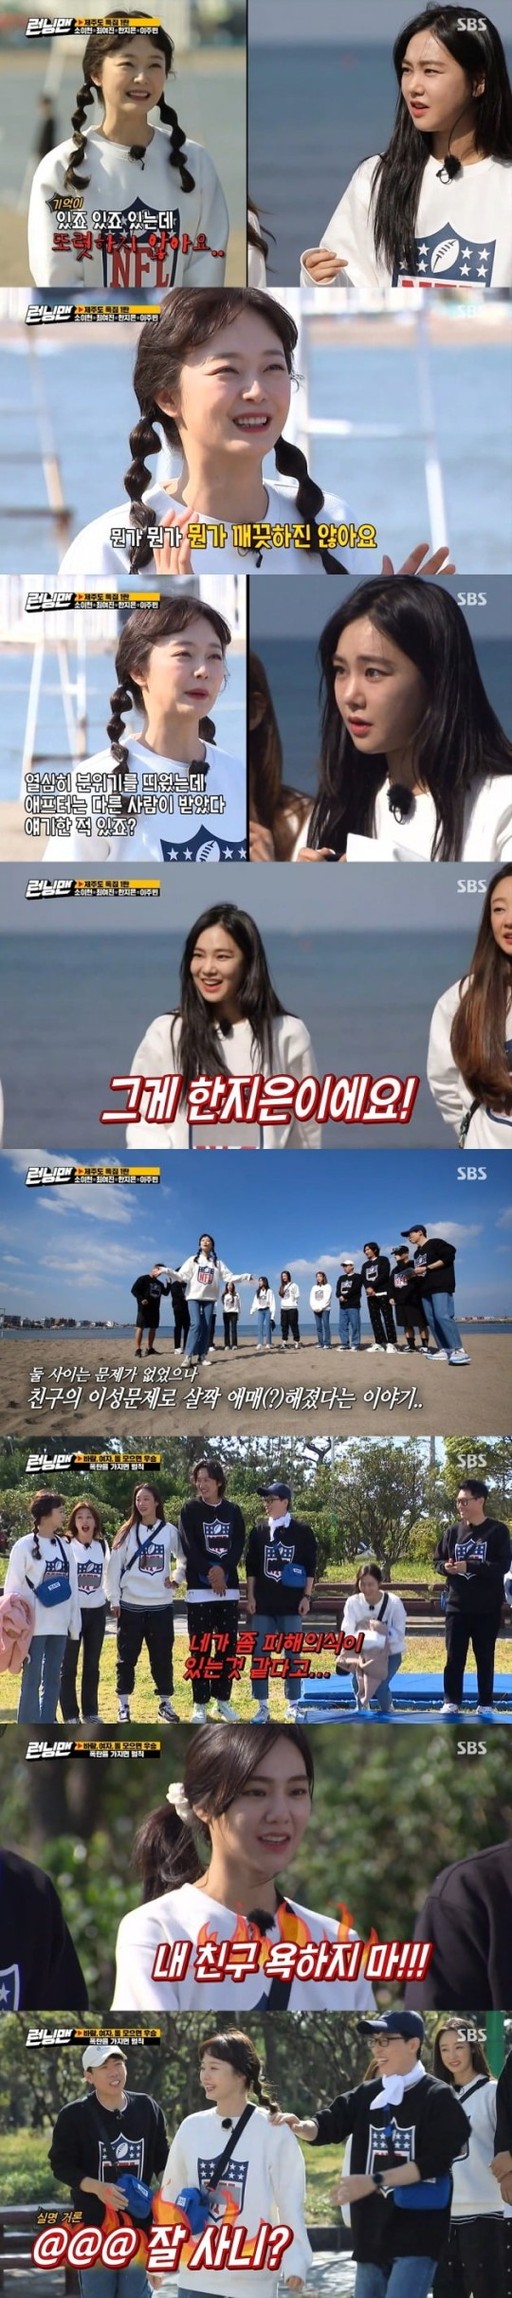 On the afternoon of the 1st, Han Ji-eun, a college motivation, appeared with fixed member Jeon So-min to release an episode of the past Meeting The Dream Team.Running Man was decorated with Jeju Island Special Feature 1 and actress Soi Hyun, Choi Yeo-jin (right side of the picture below the man), and Lee Ju-bin as guests.Jeon So-min and Han Ji-eun are alumni of Wolgok station broadcasting entertainment, and Han Ji-eun has played the role of Hwang Han-joo, a marketing producer of drama production, in the JTBC drama Melloga Constitution, which was broadcast last year.Han Ji-eun replied, I do not know when asked, What kind of friend was you in college? And Jeon So-min replied, It is not clear and It is not cleaner than that.There was a man woven between Friends, he said, leaving a strange nuance.Han Ji-eun also said, I do not know how much to talk about it because it is the first time I have an entertainment, but I remember that it was The Dream Team.I thought of it, said Jeon So-min. I had a hard time meeting when I was in school before, but after I received another person, he recalled.It is Han Ji-eun, he said, I made the atmosphere and said, I have passed it, but after I received it, someone else received it. Singer Kim Jong Kook then asked Han Ji-eun to Let the people talk.Han Ji-eun said, Every time I met, my seniors designated me, and I always went out a lot, he said. I am sorry if I did it at the meeting.I do not mean to do it on purpose, but what can I do? He said, I did not do this on purpose because they said it was good.In addition, I actually remember that the direct relationship between me and Somin seems to be a sense of damage to me unilaterally.Im not thinking about anything, but Im getting involved with a very close friend, he said. Im getting involved with a man, but I got a little bit involved in the middle.When the relationship between Jeon So-min and Han Ji-eun was revealed, broadcaster Yoo Jae-Suk (third from left in the photo below the man) brought up the story from the gathering.(Jeon) Somin-ah, (Han) Ji-eun said there is nothing else about you, but you seem to have a sense of damage, Yoo Jae-Suk said.Han Ji-eun is clean, said Jeon So-min, who did not reveal his real name on the air, saying, Ji Eun is a problem with Friend.Yoo Jae-Suk suggested, Planes passes here every four minutes, so talk about it then.So, Jeon So-min did not miss the moment Planes passed and mentioned Han Ji-eun Friends real name.Han Ji-eun then laughed and laughed, Do not swear my Friend.